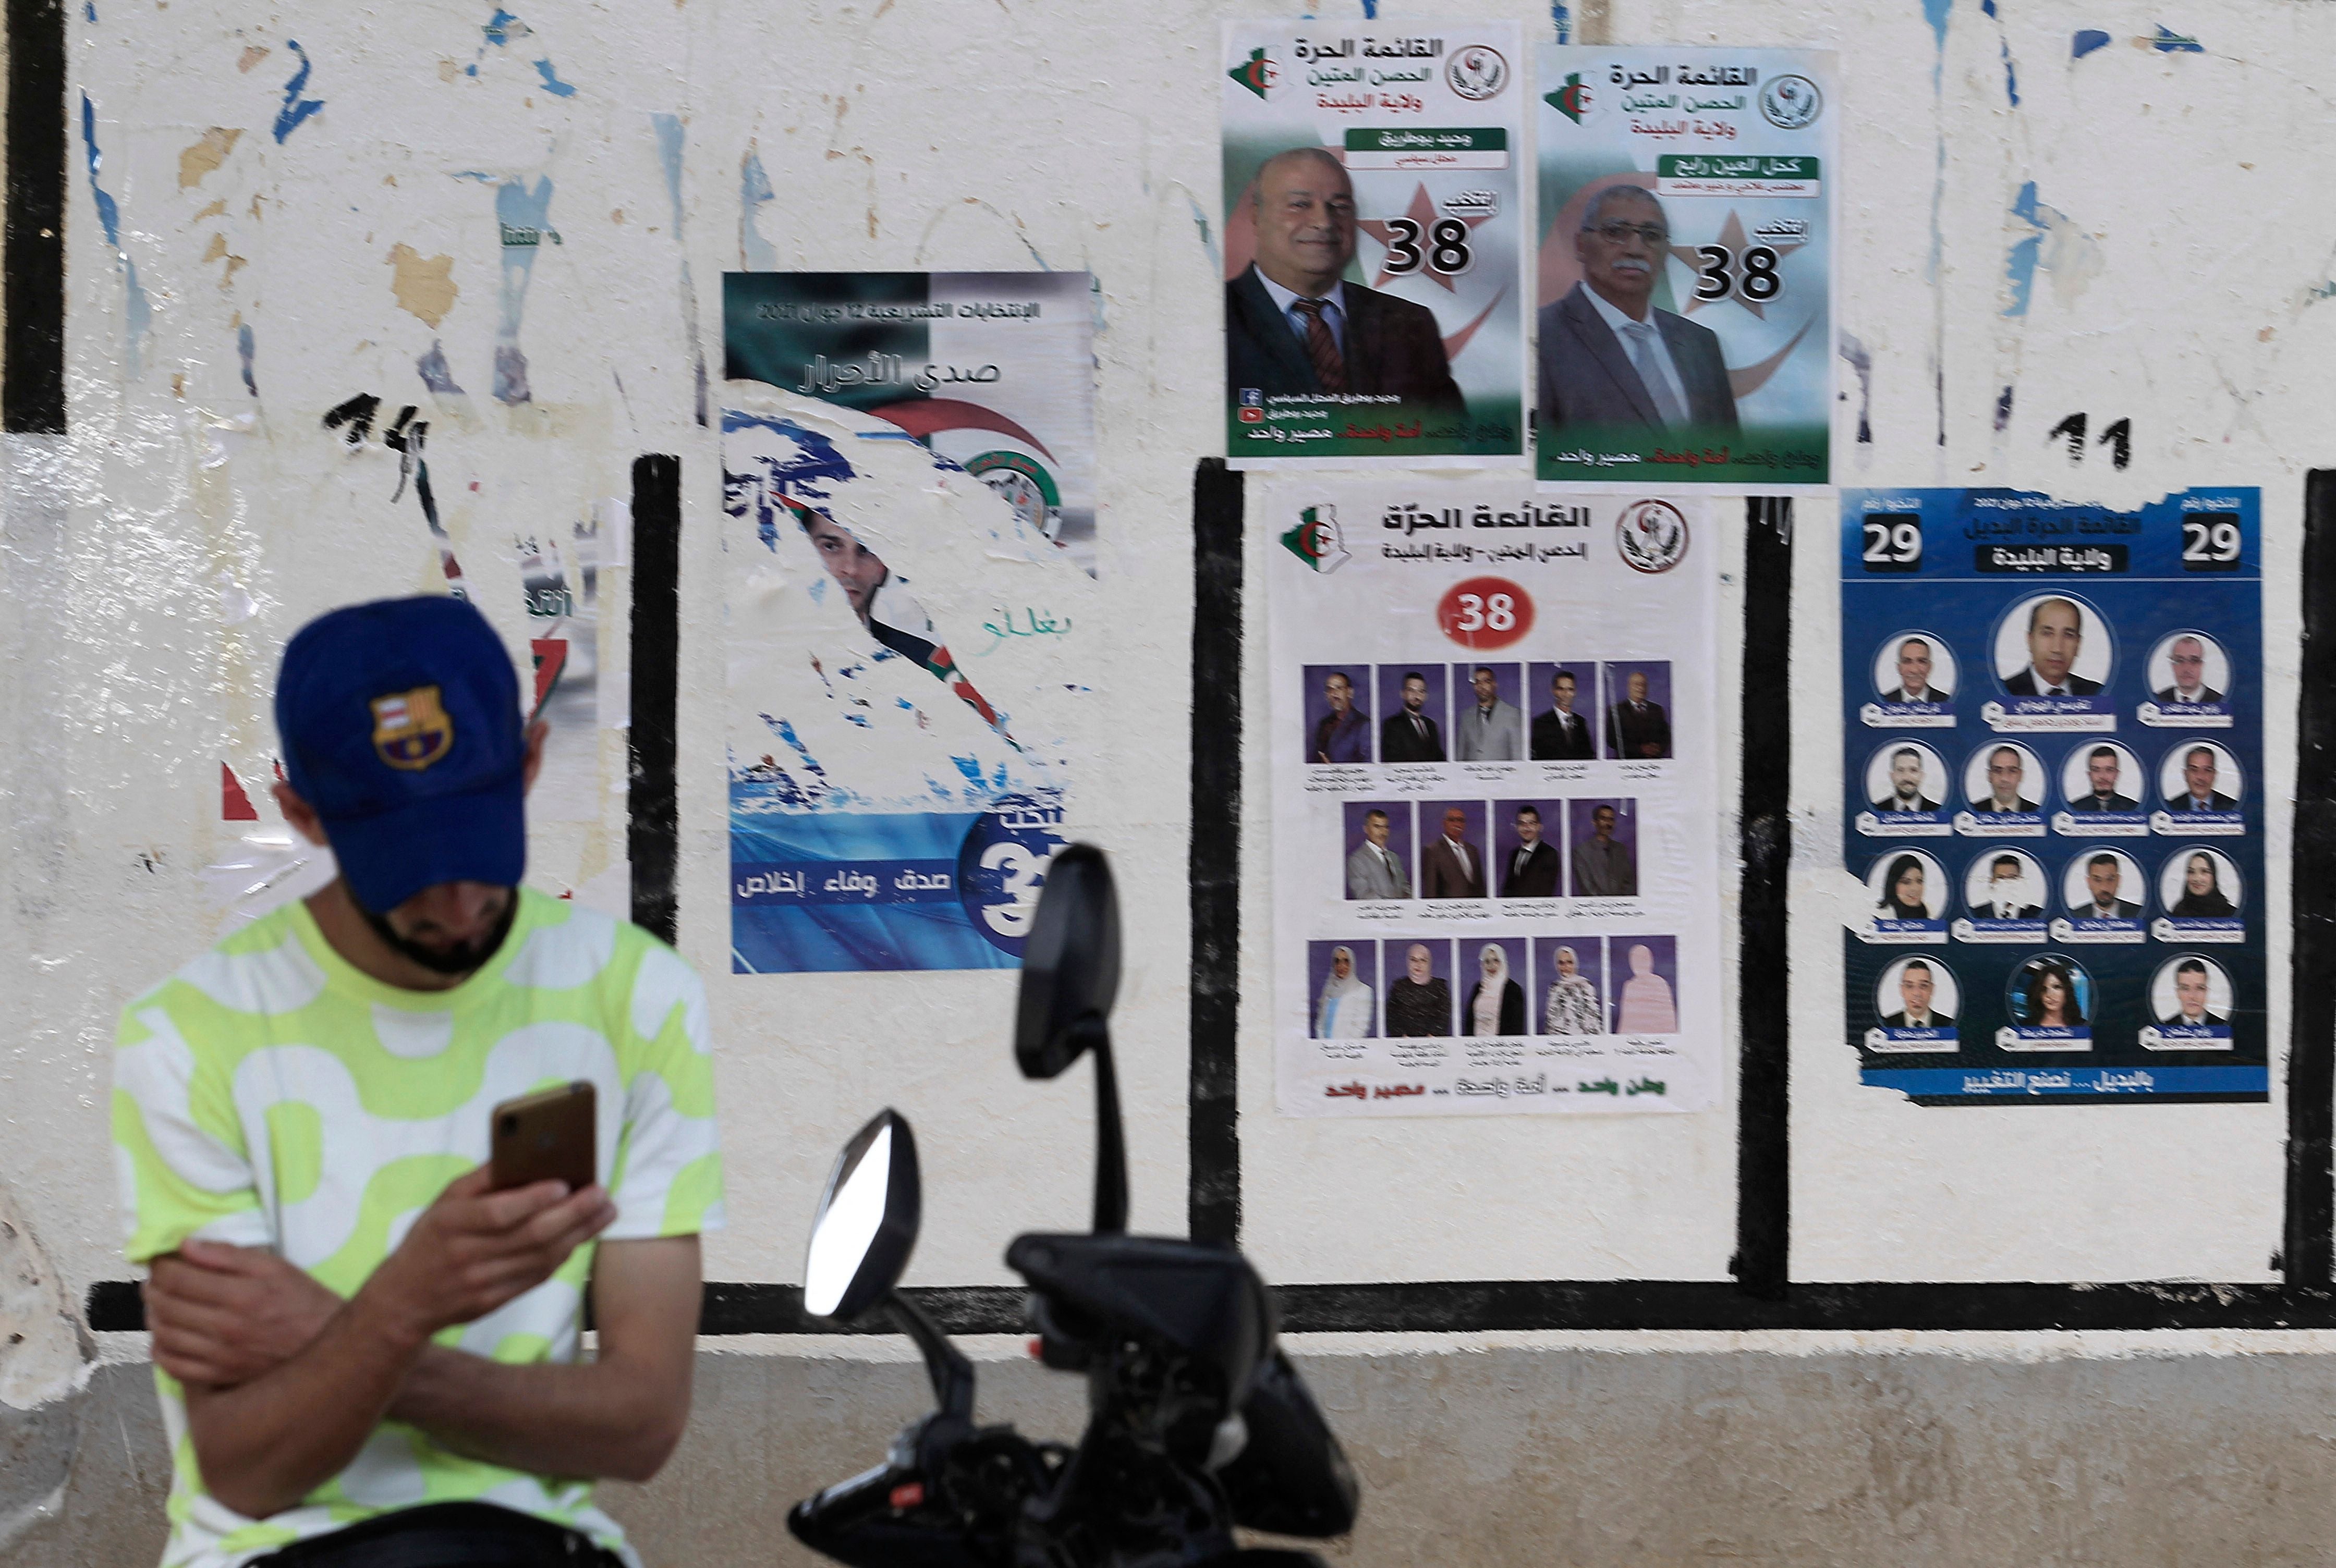 An Algerian man checks his mobile phone next to election posters in the capital Algiers ahead of the upcoming elections scheduled for June 12